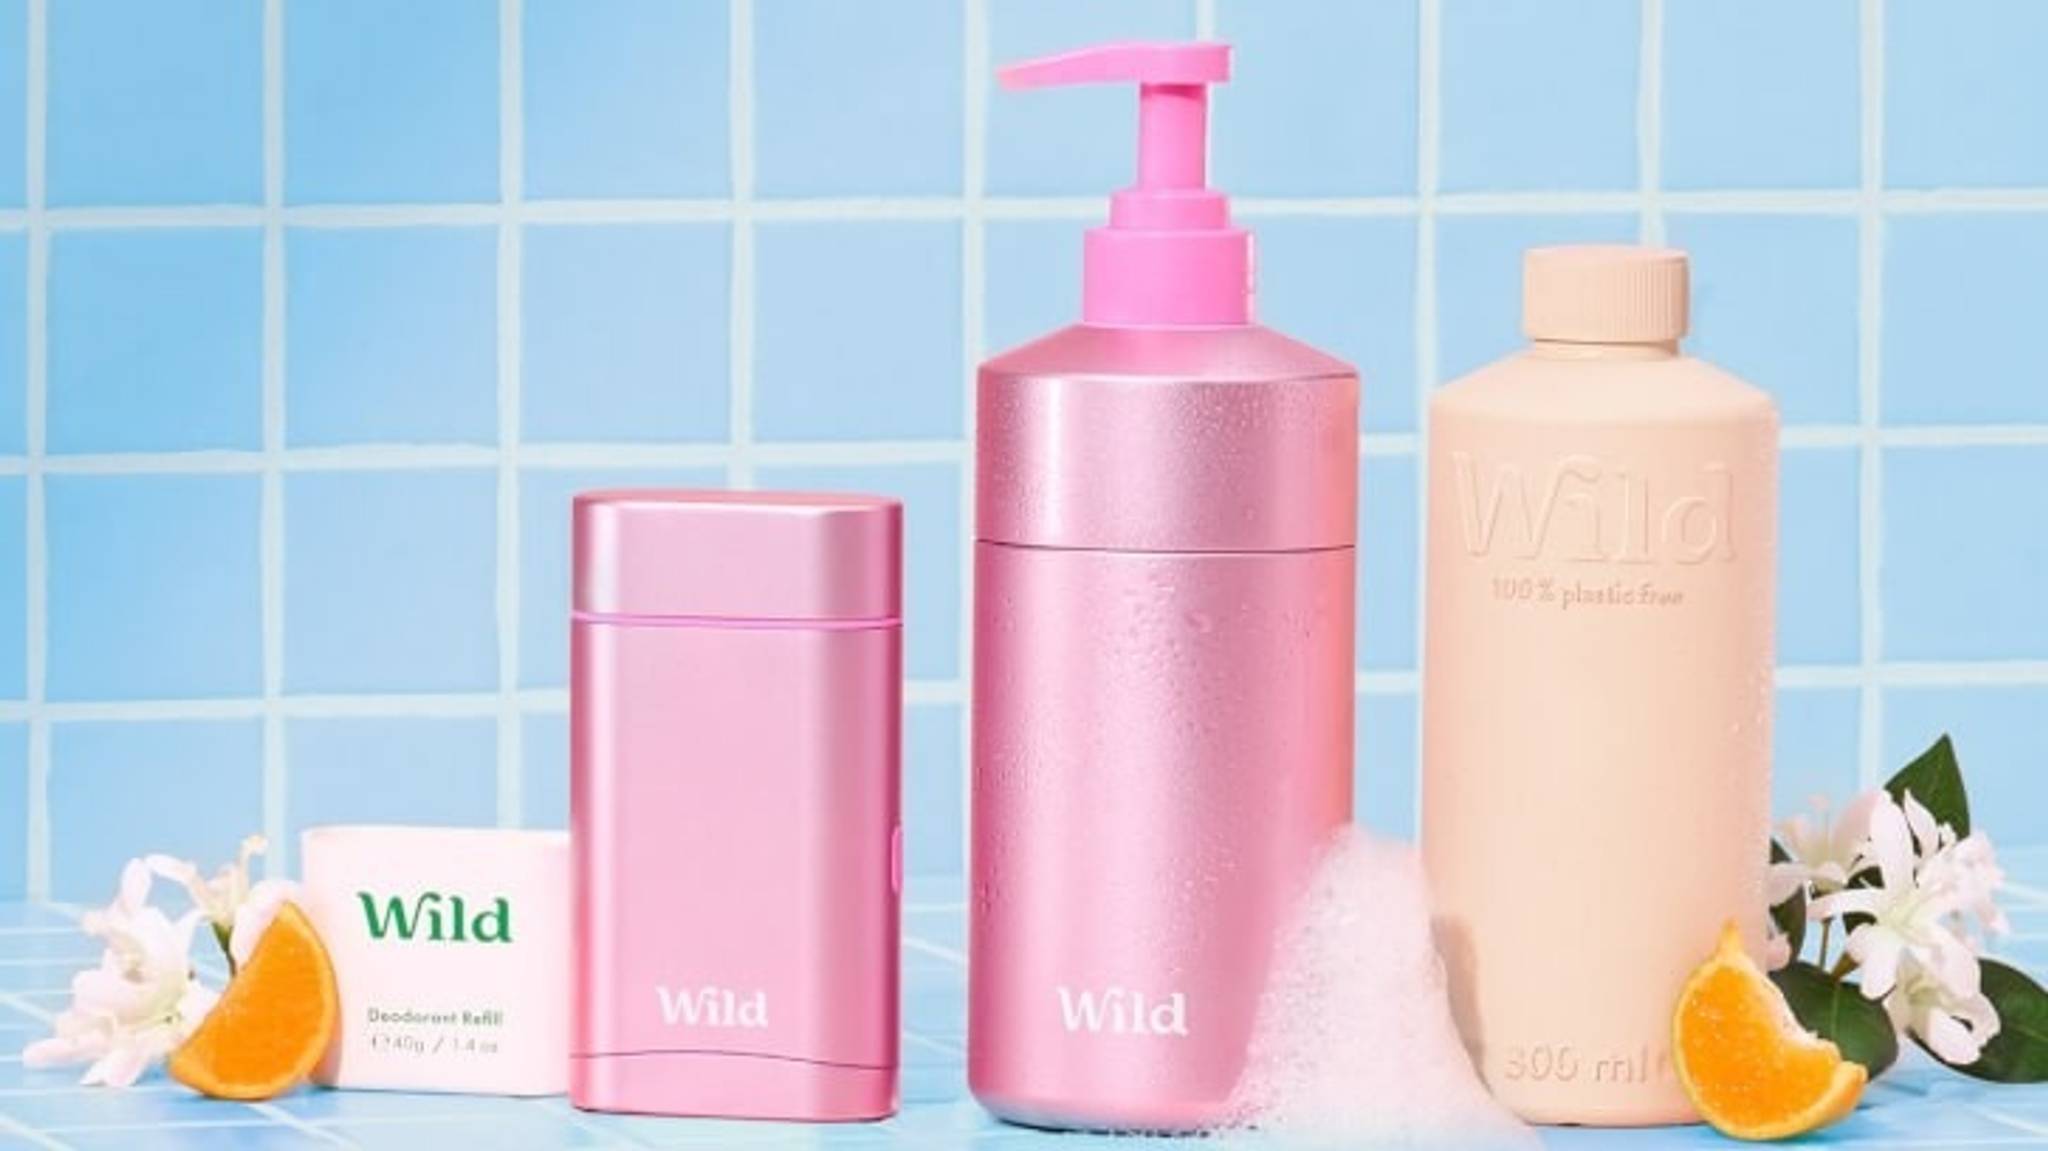 Wild's compostable shower gel offers everyday eco values